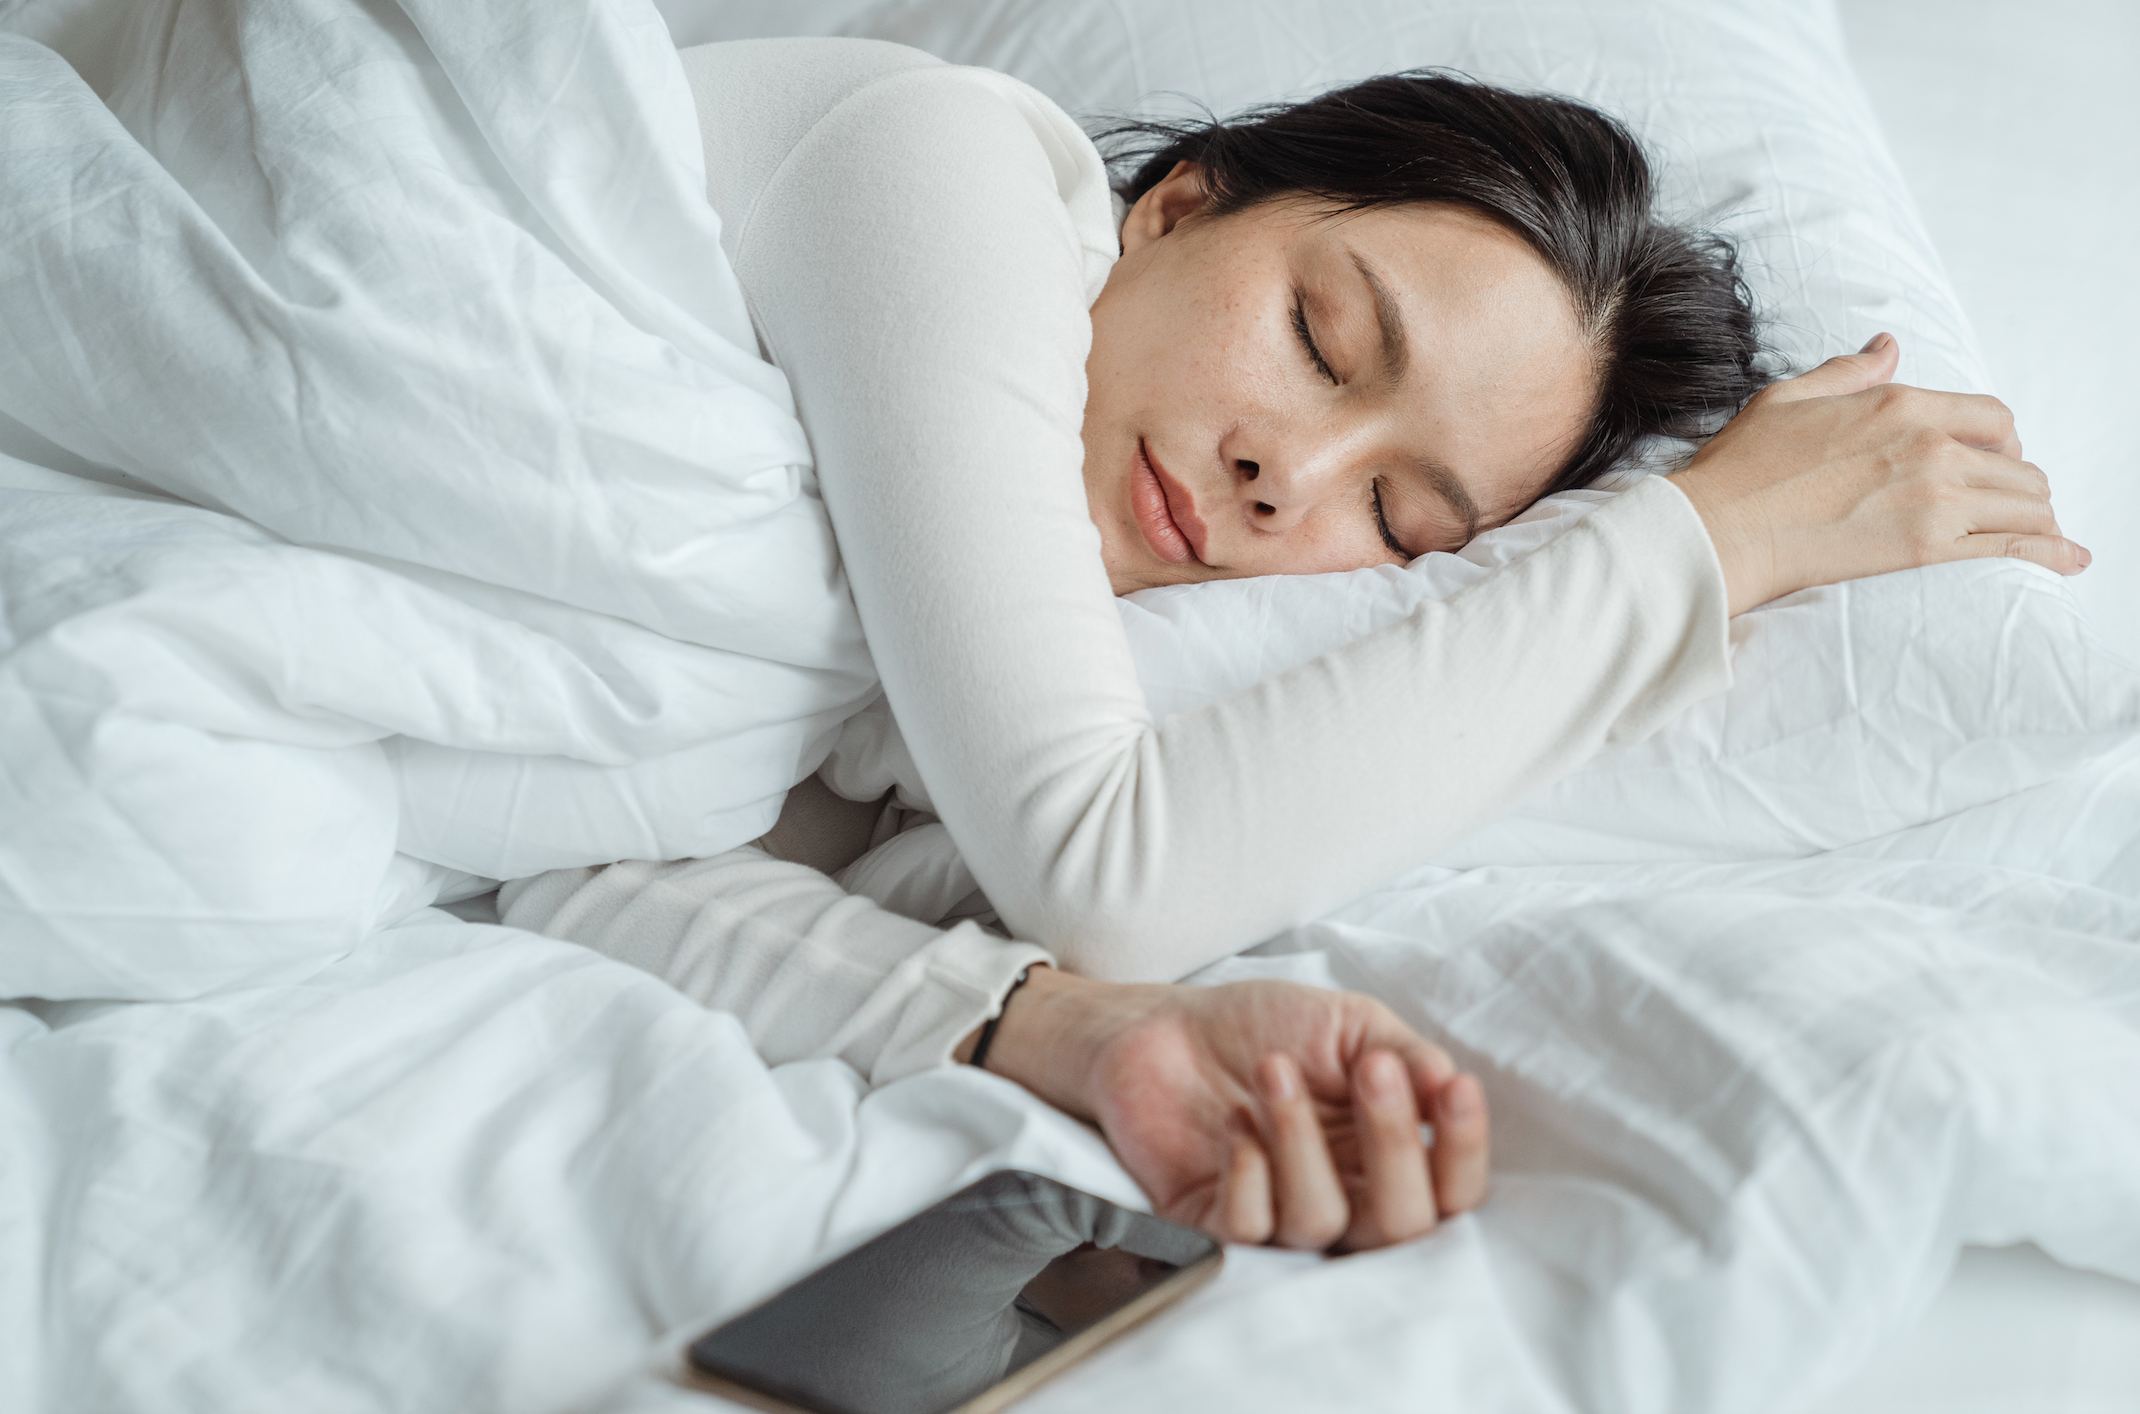 How Sleeping Colder May Minimize Your ‘Restless Legs’ and Boost Deep Sleep